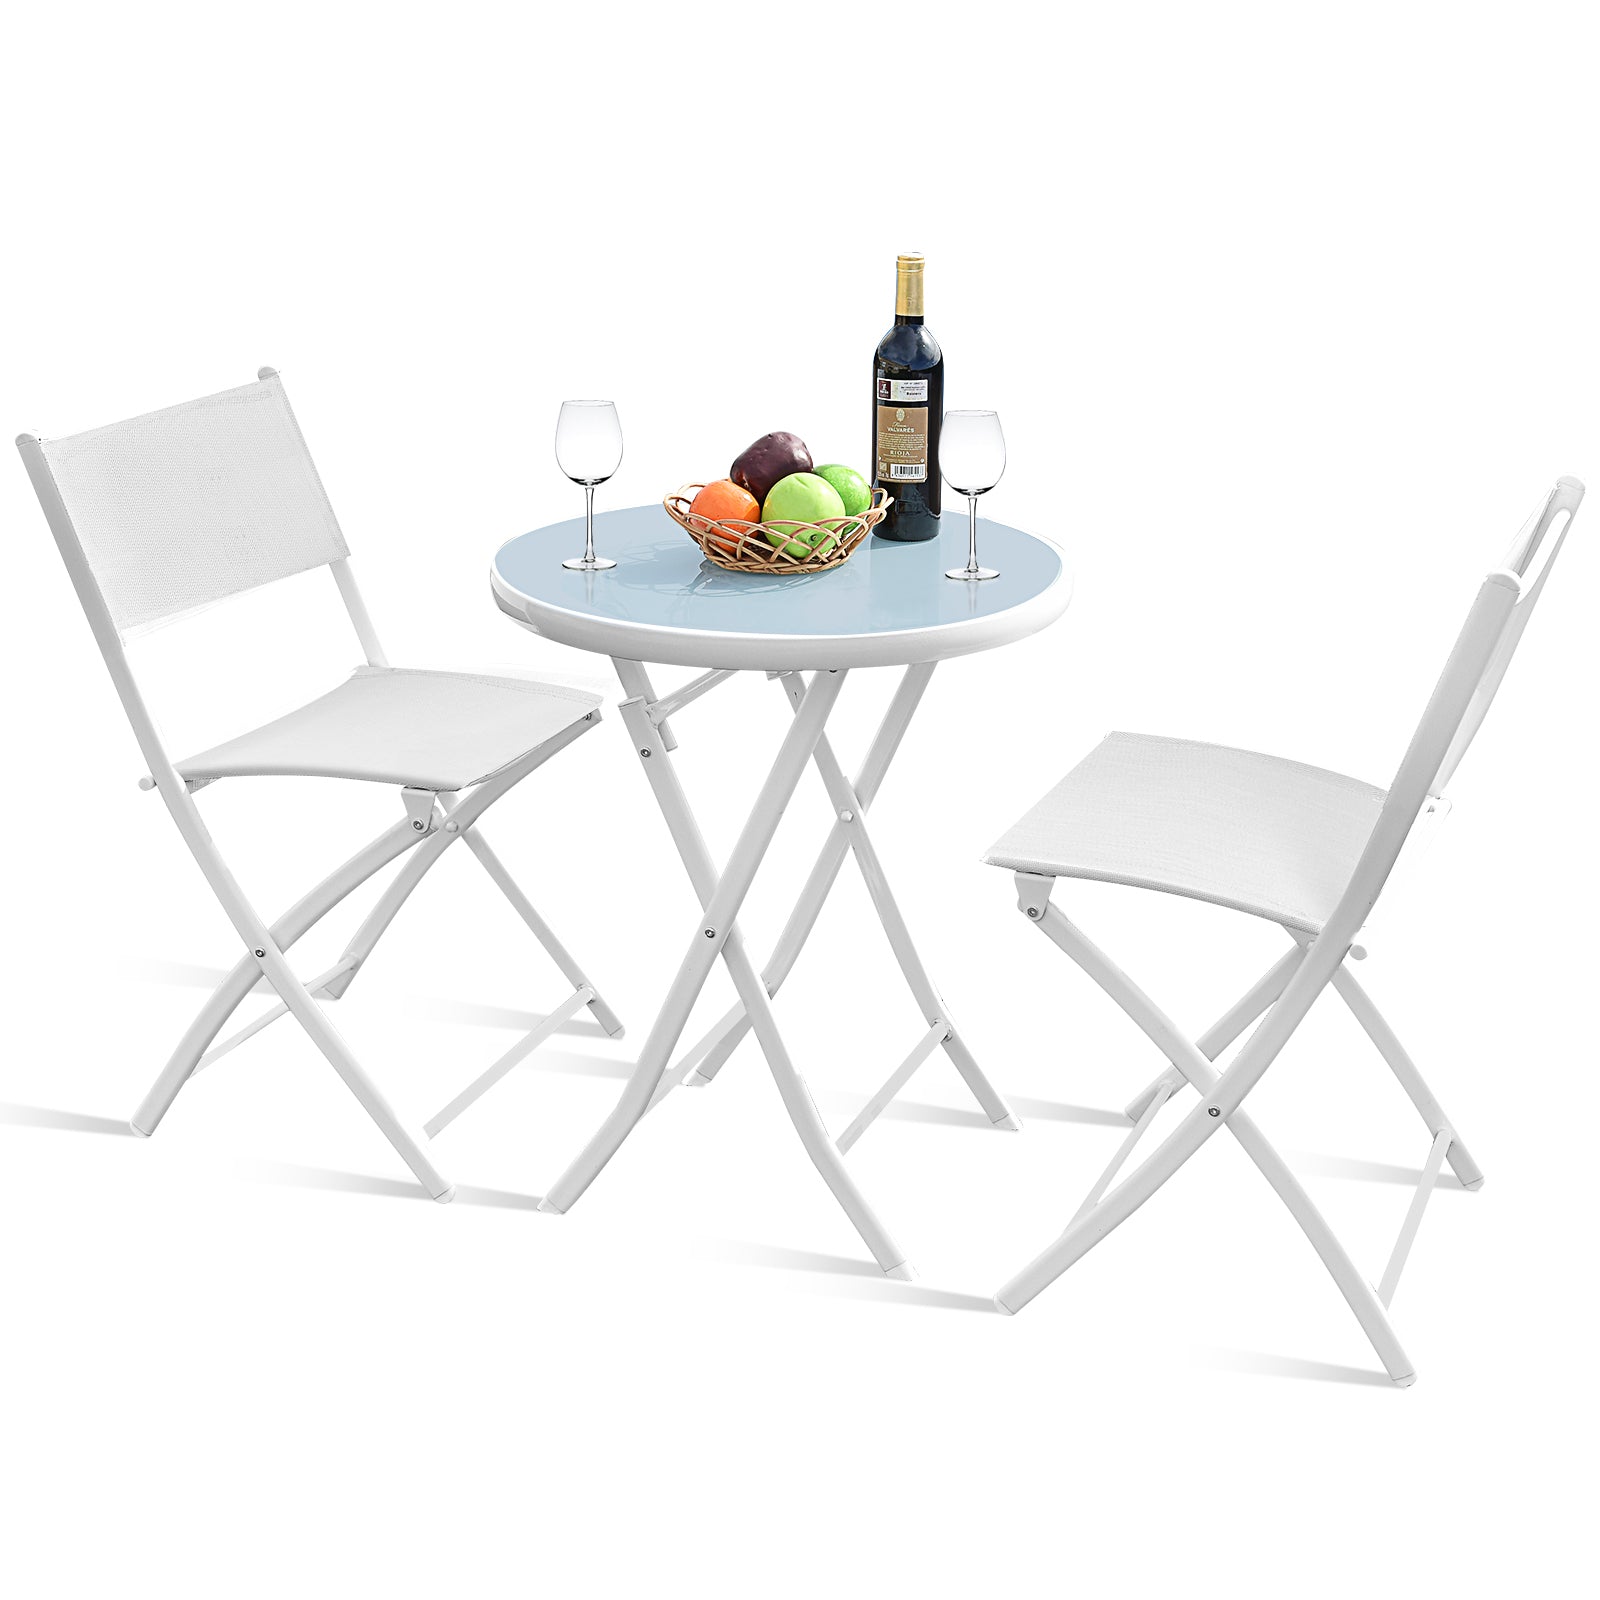 Giantex Bistro Table Set, 3 Piece Patio Bistro Set, Outdoor Folding Table and Chairs